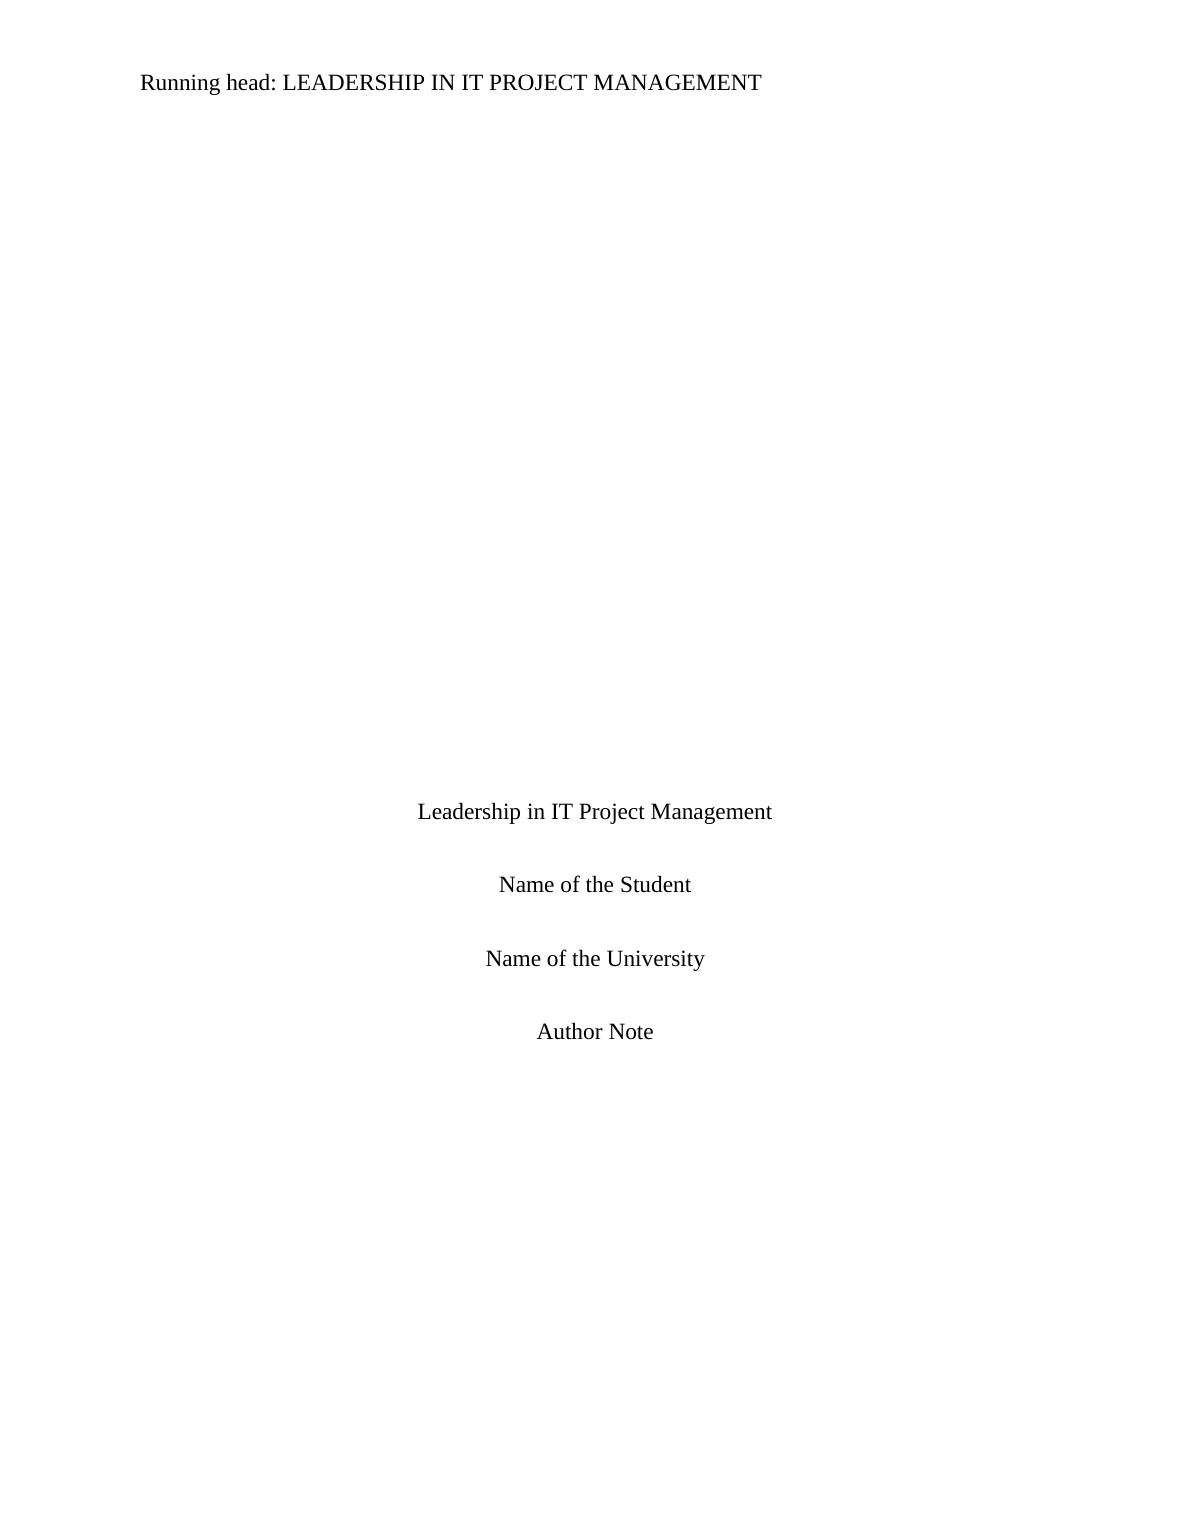 Leadership in IT Project Management PDF_1